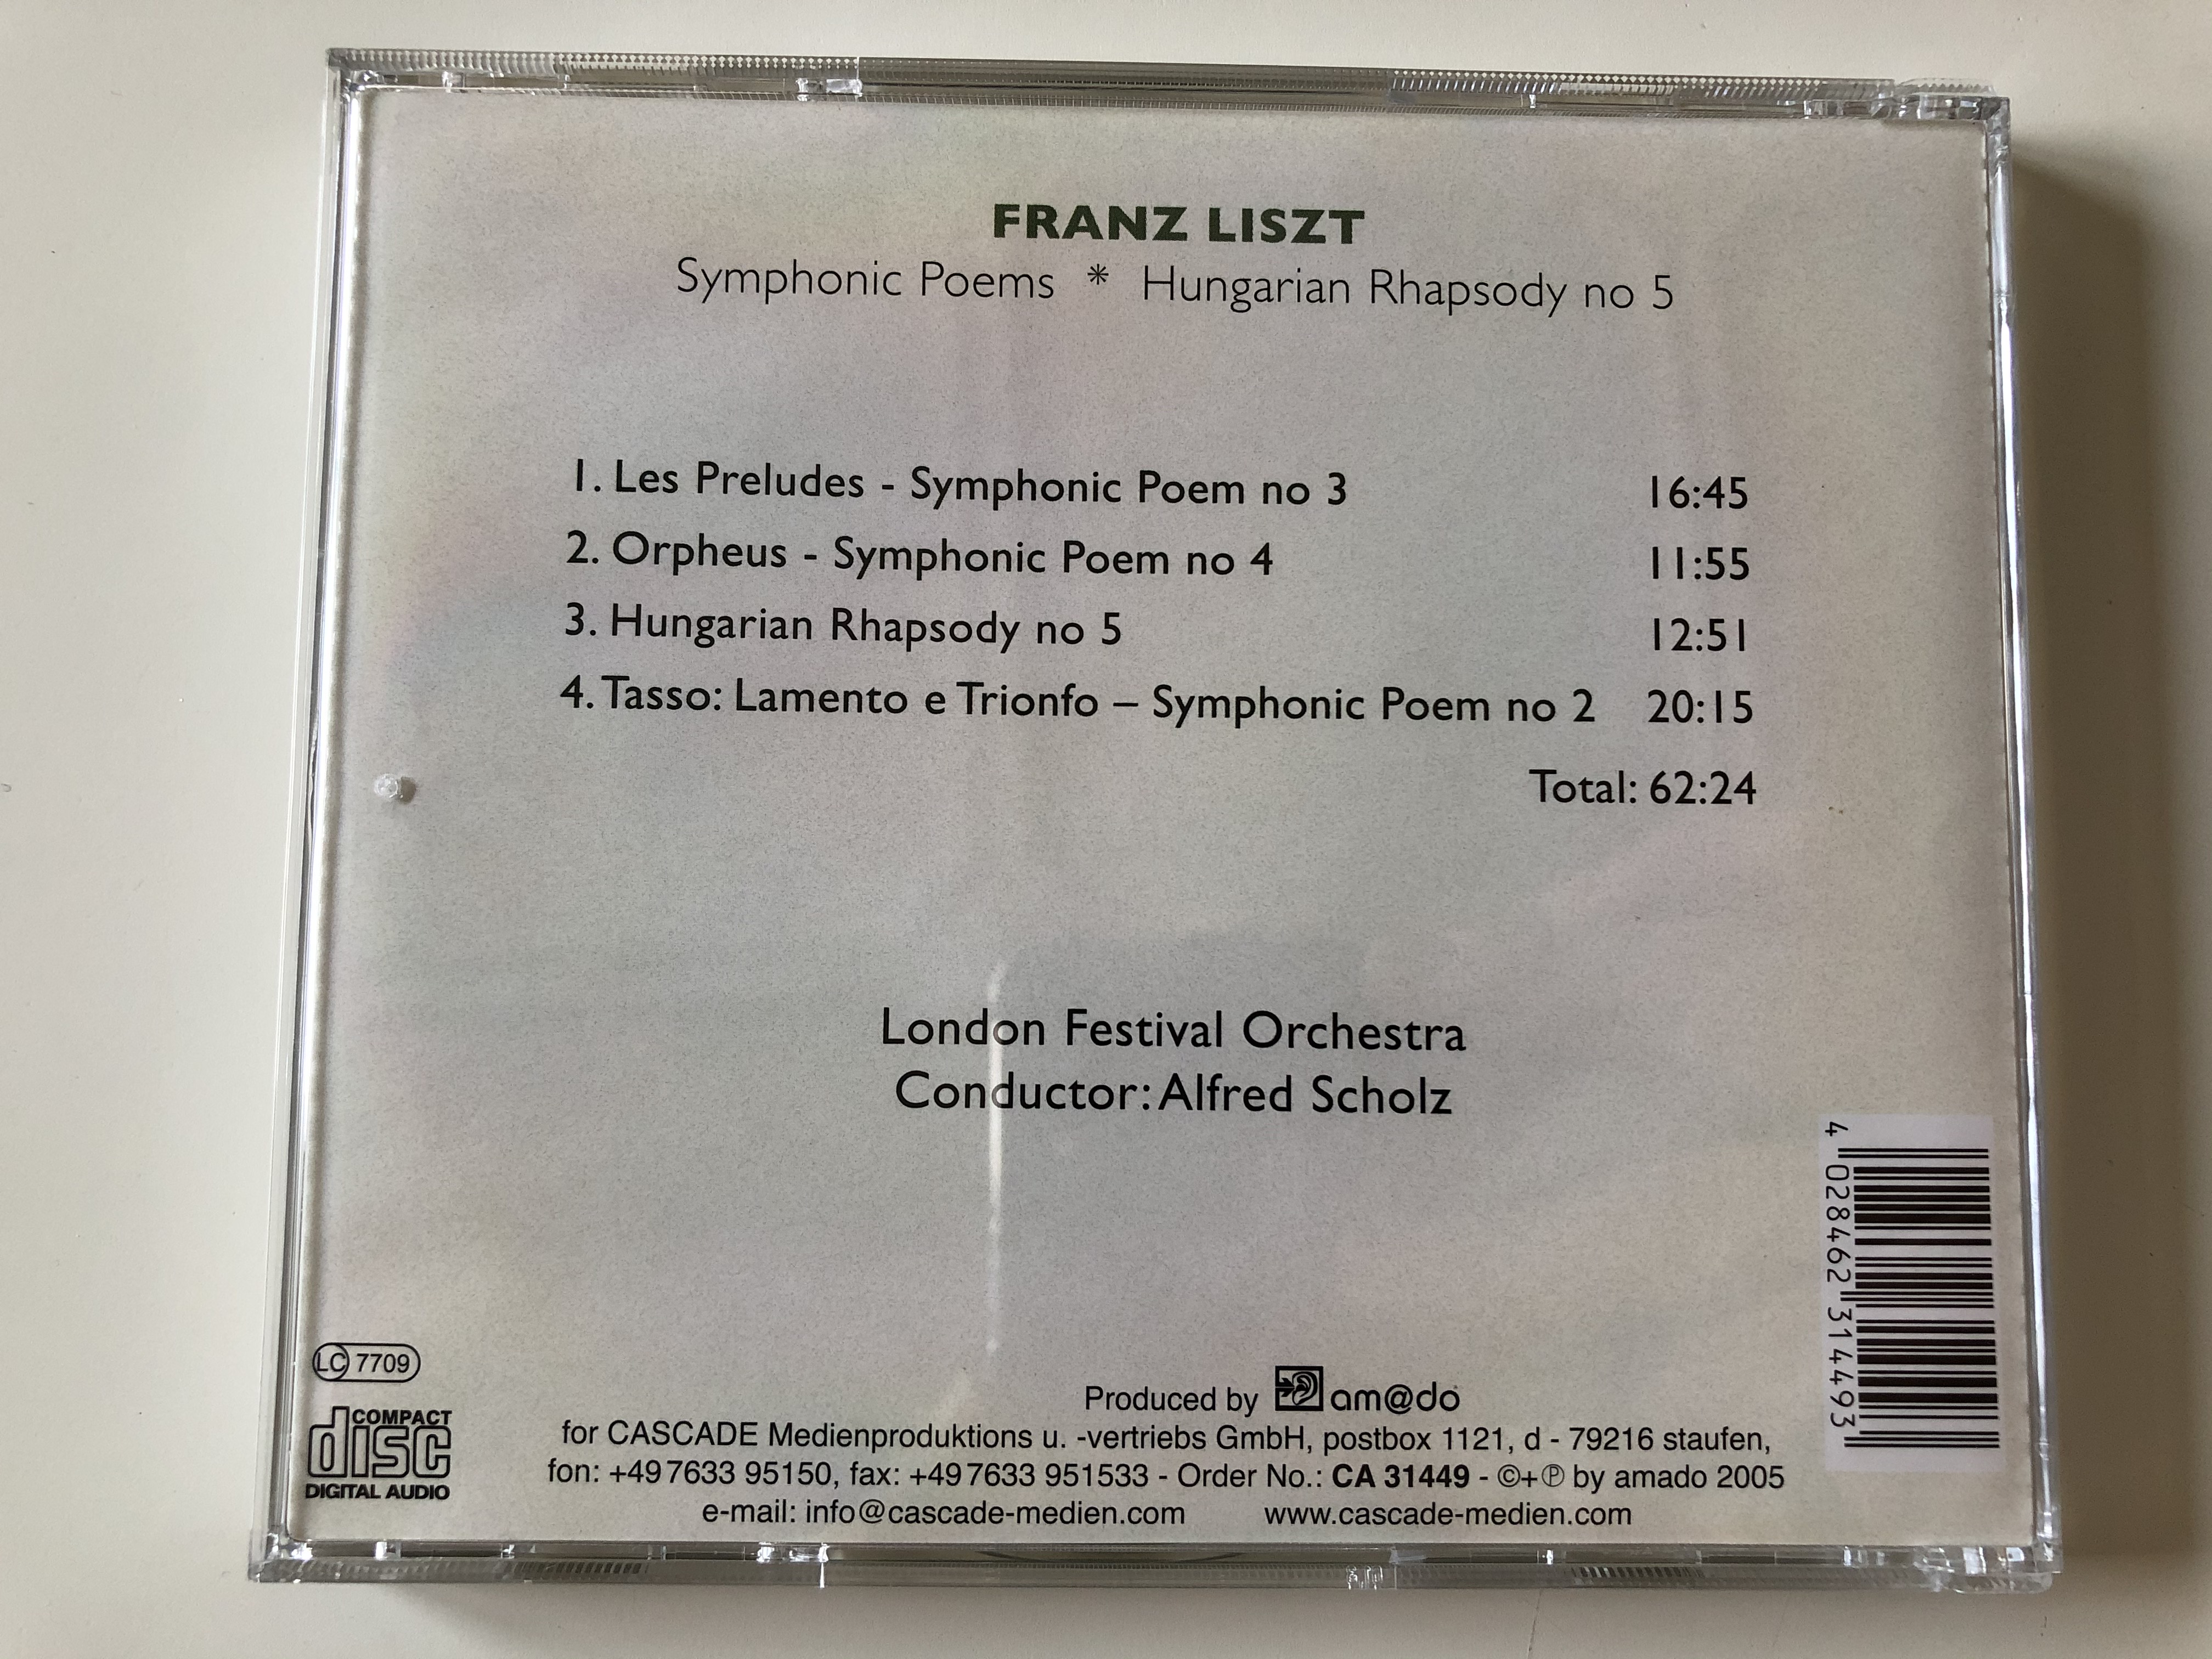 franz-liszt-symphonic-poems-nos-2-3-and-4-hungarian-rhapsody-no-5-london-festival-orchestra-conductor-alfred-scholz-amado-audio-cd-2005-31449-5-.jpg